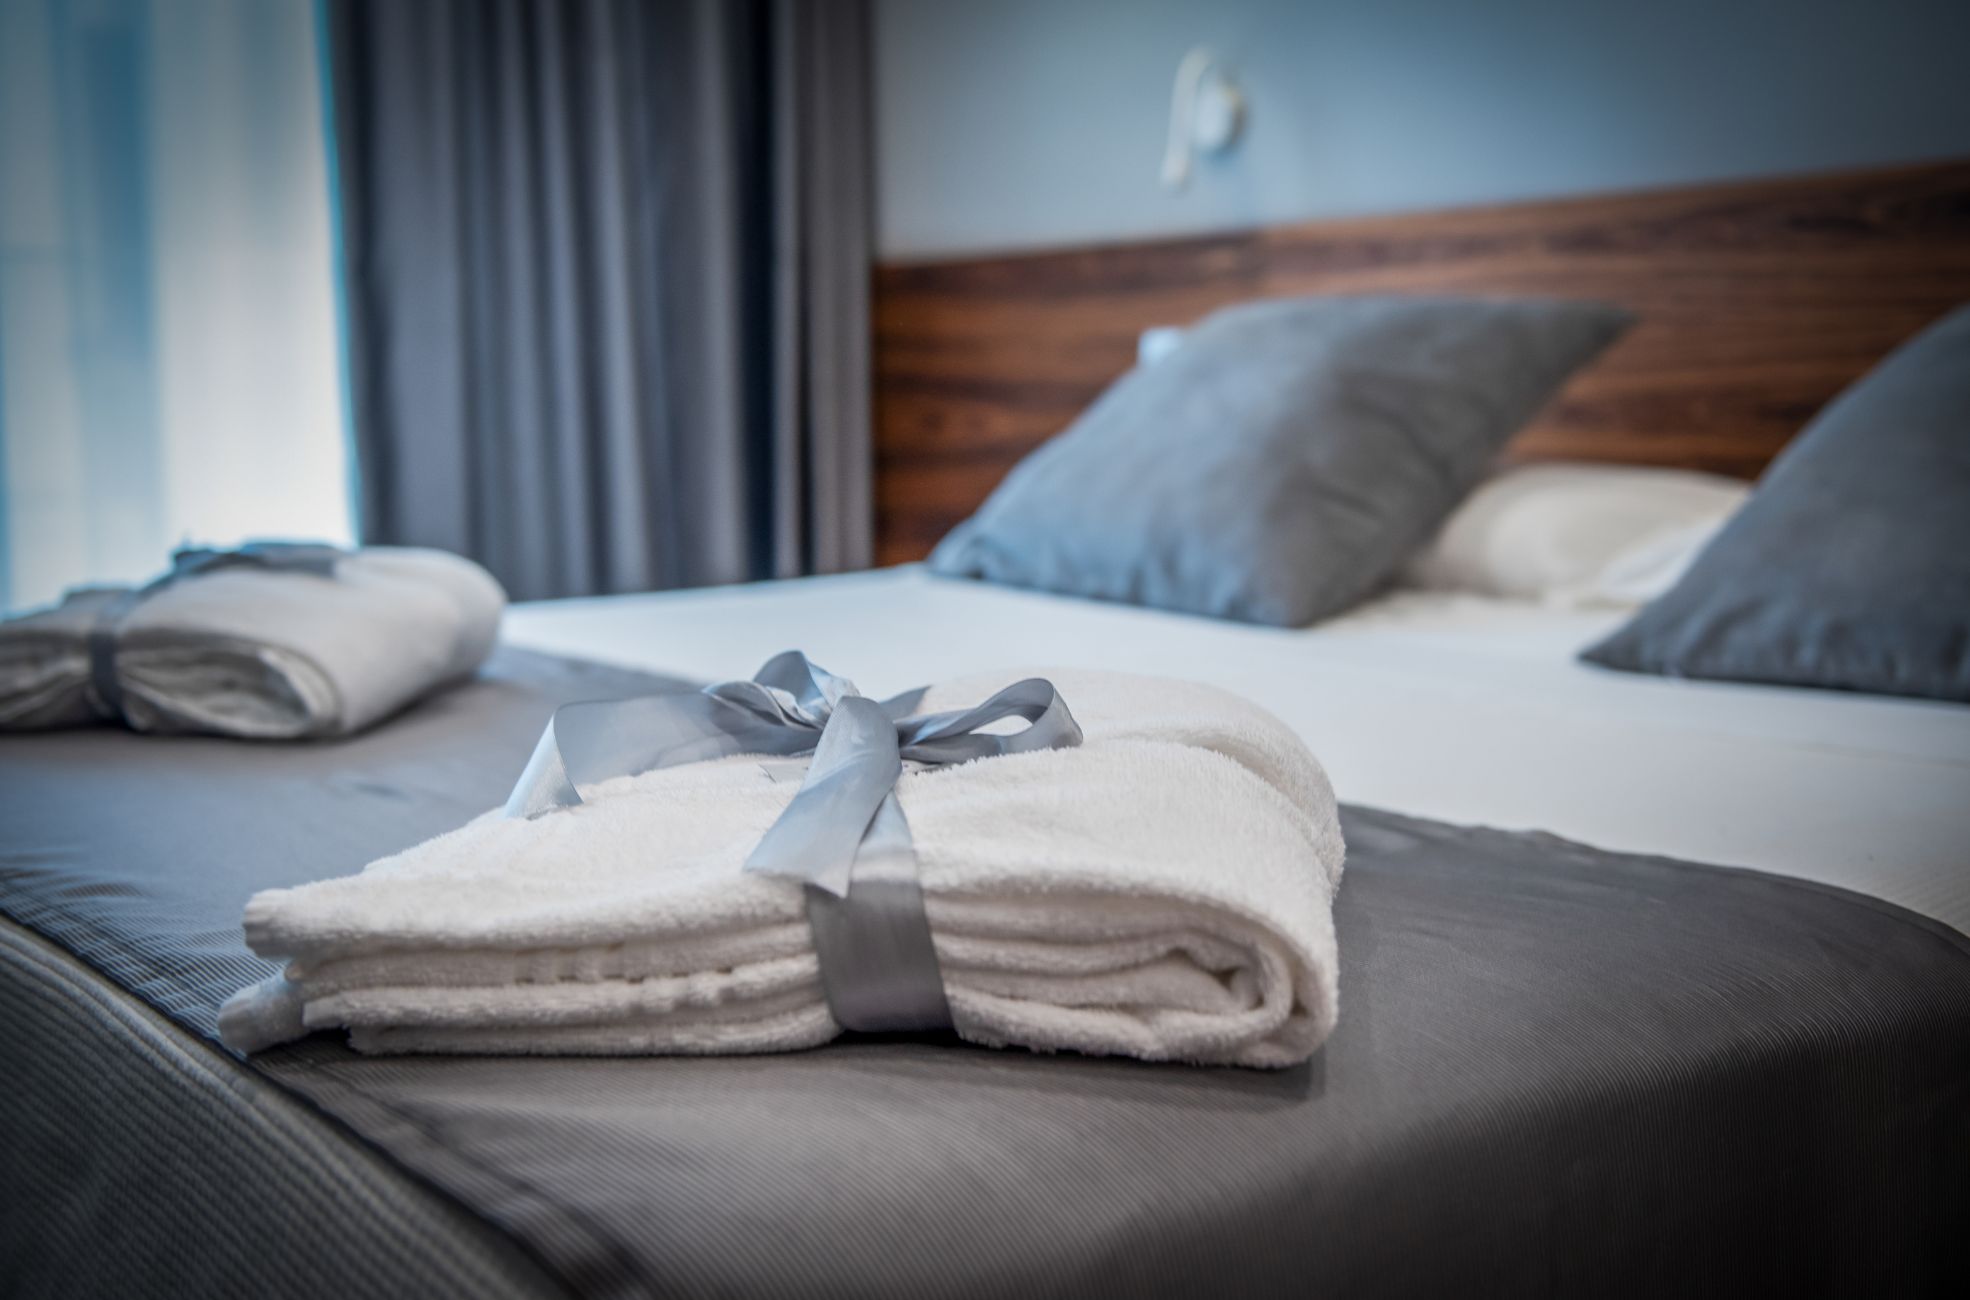 Hotel Bedding And Linen